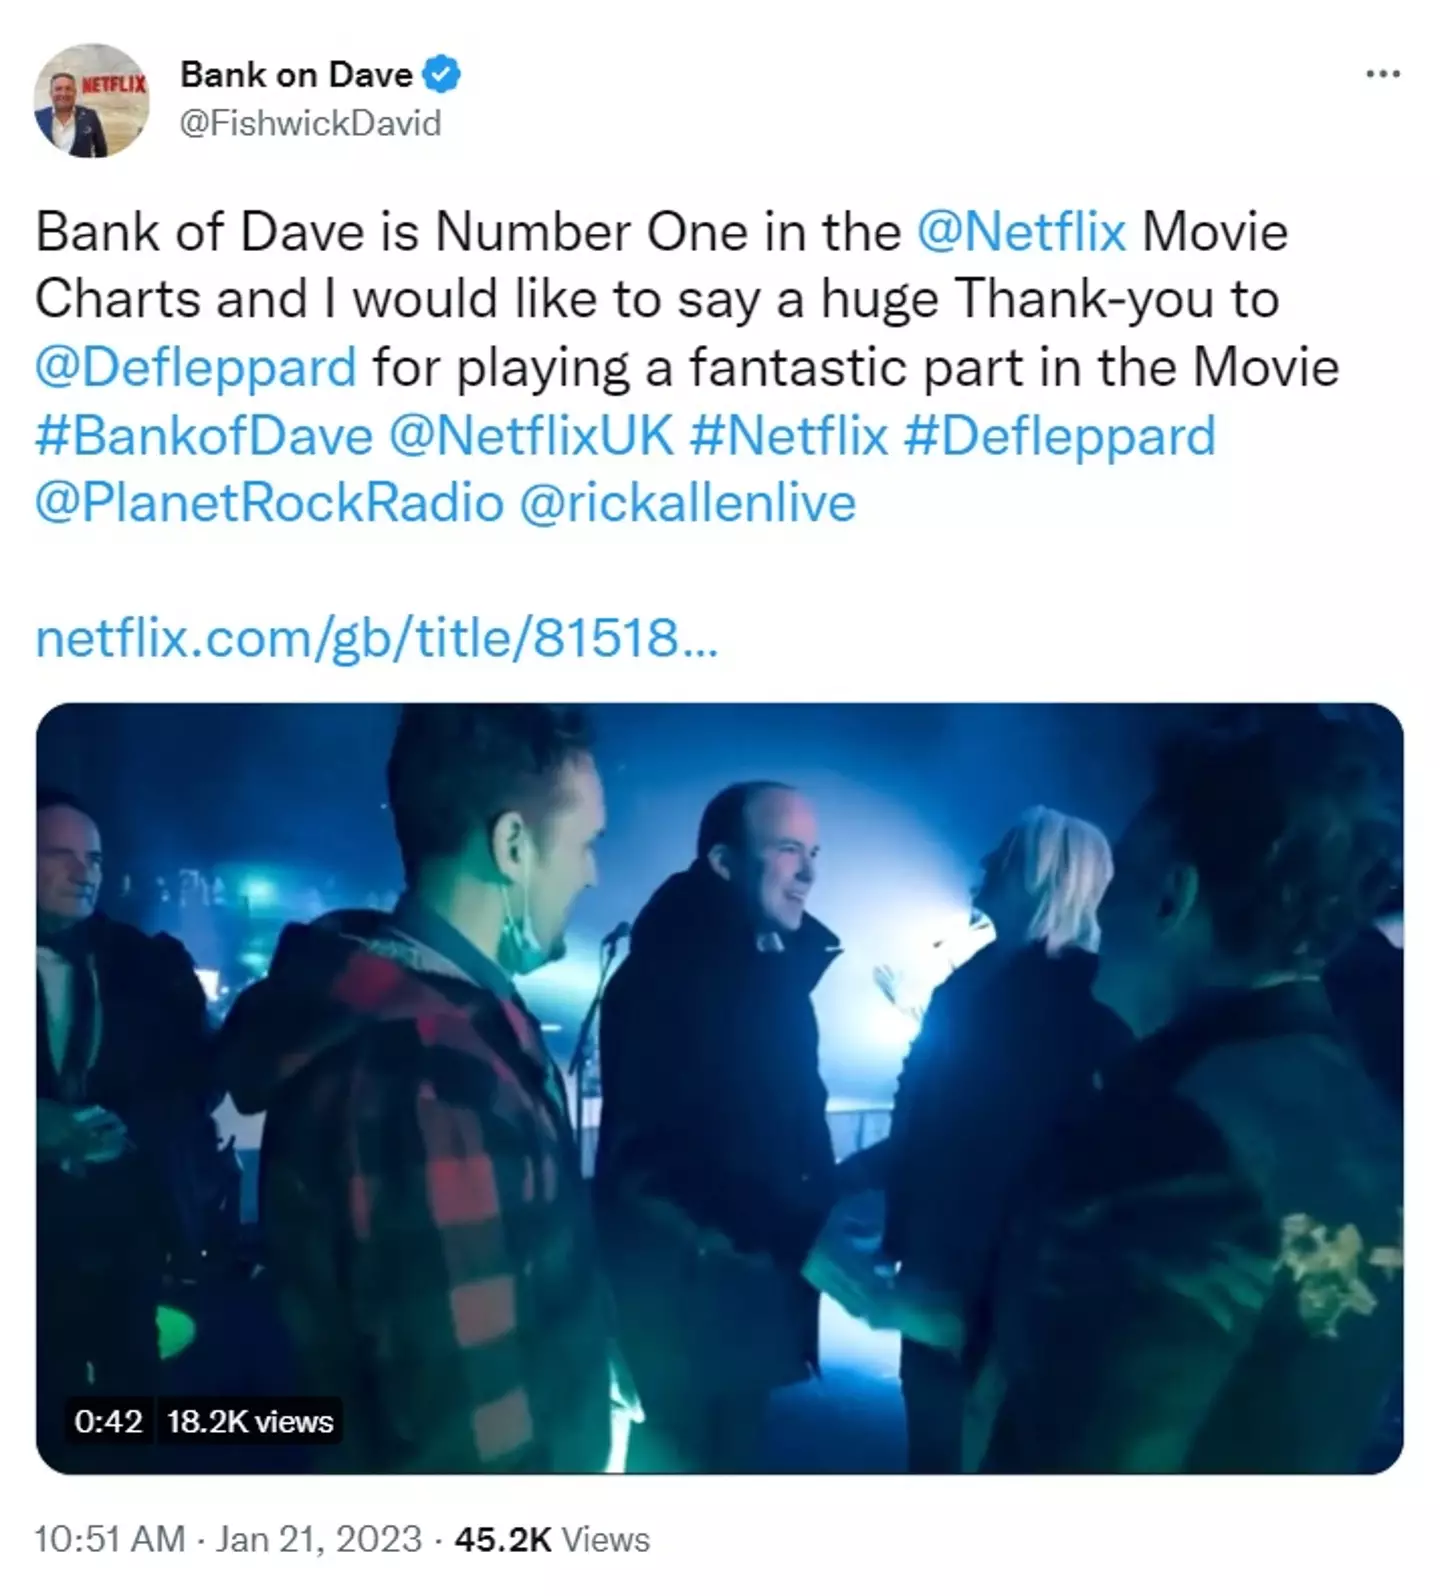 The real life Dave Fishwick celebrated his movie becoming the top film on Netflix.